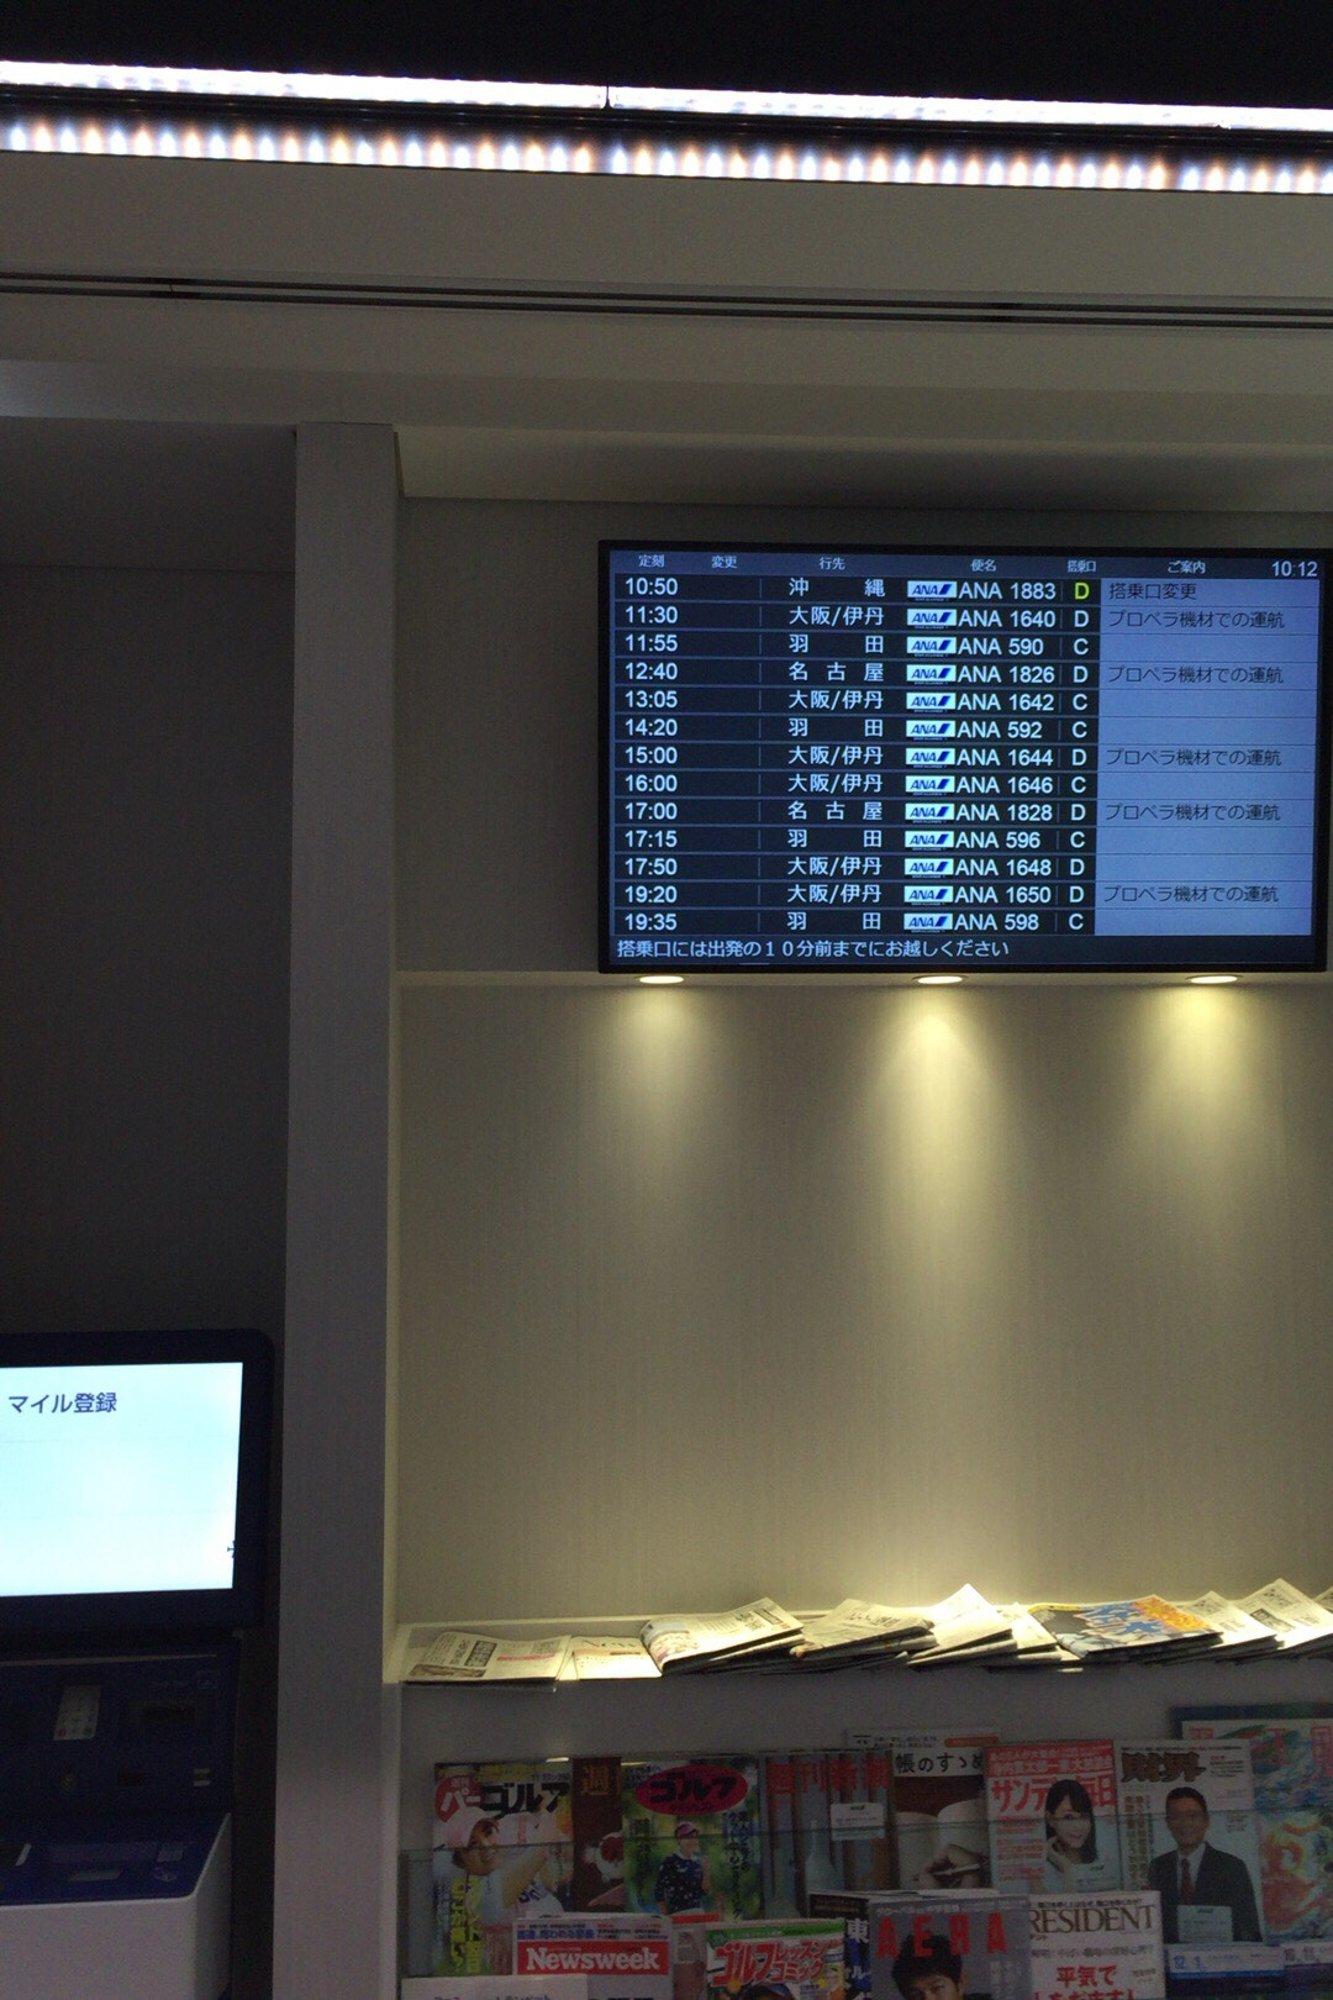 All Nippon Airways ANA Lounge image 3 of 9